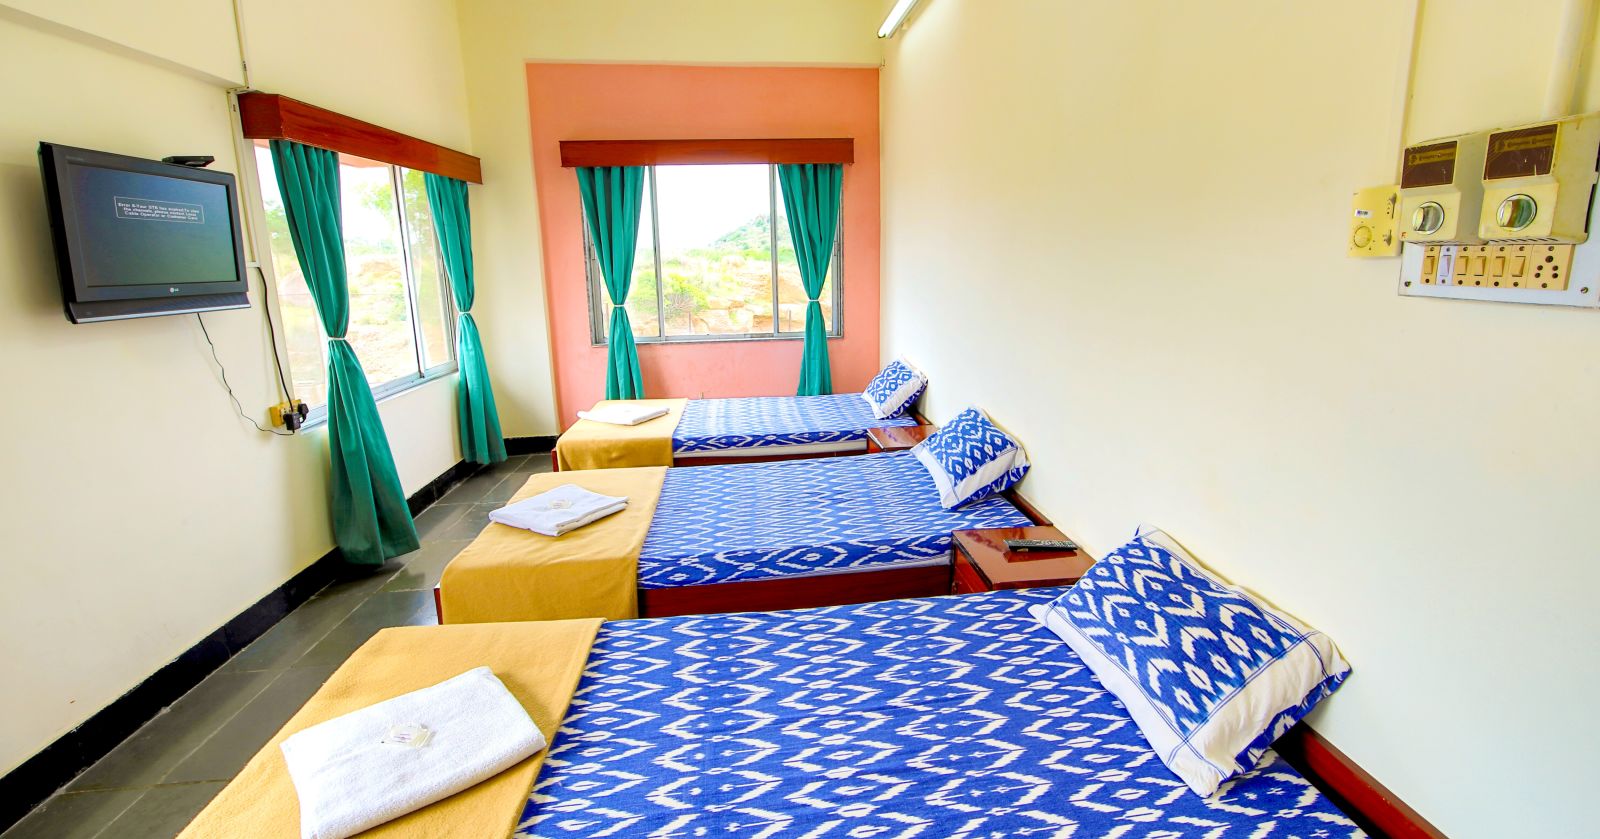 A sideview of three beds with bedding in a room with a window and TV | Hotel Sahara